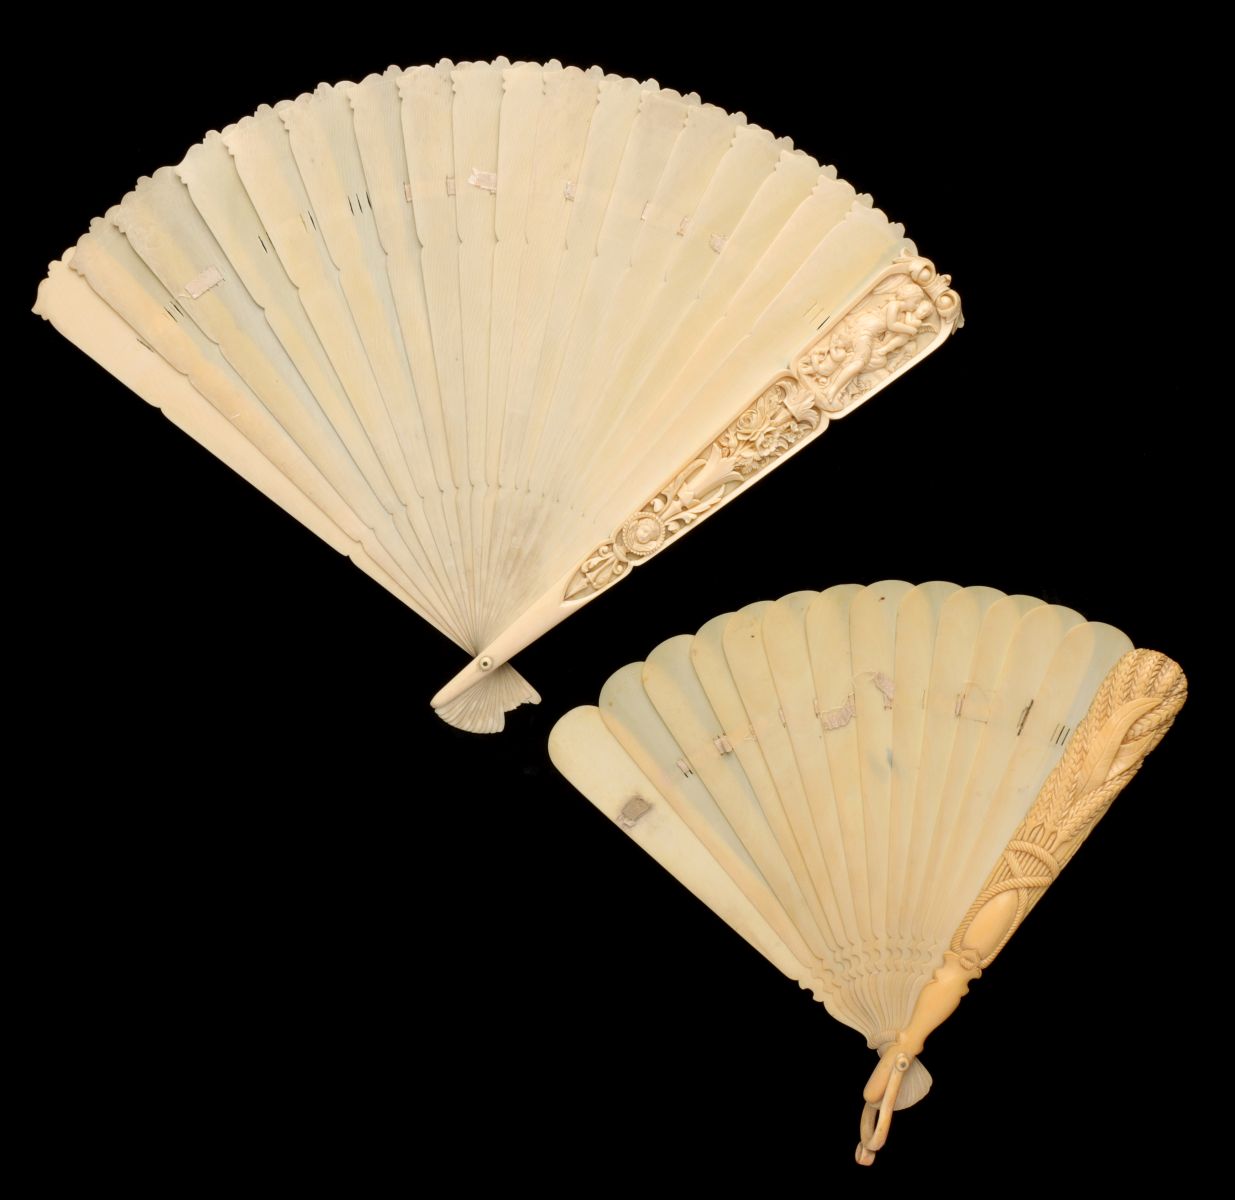 TWO 19TH C. IVORY HAND FANS WITH CARVING IN HIGH RELIEF